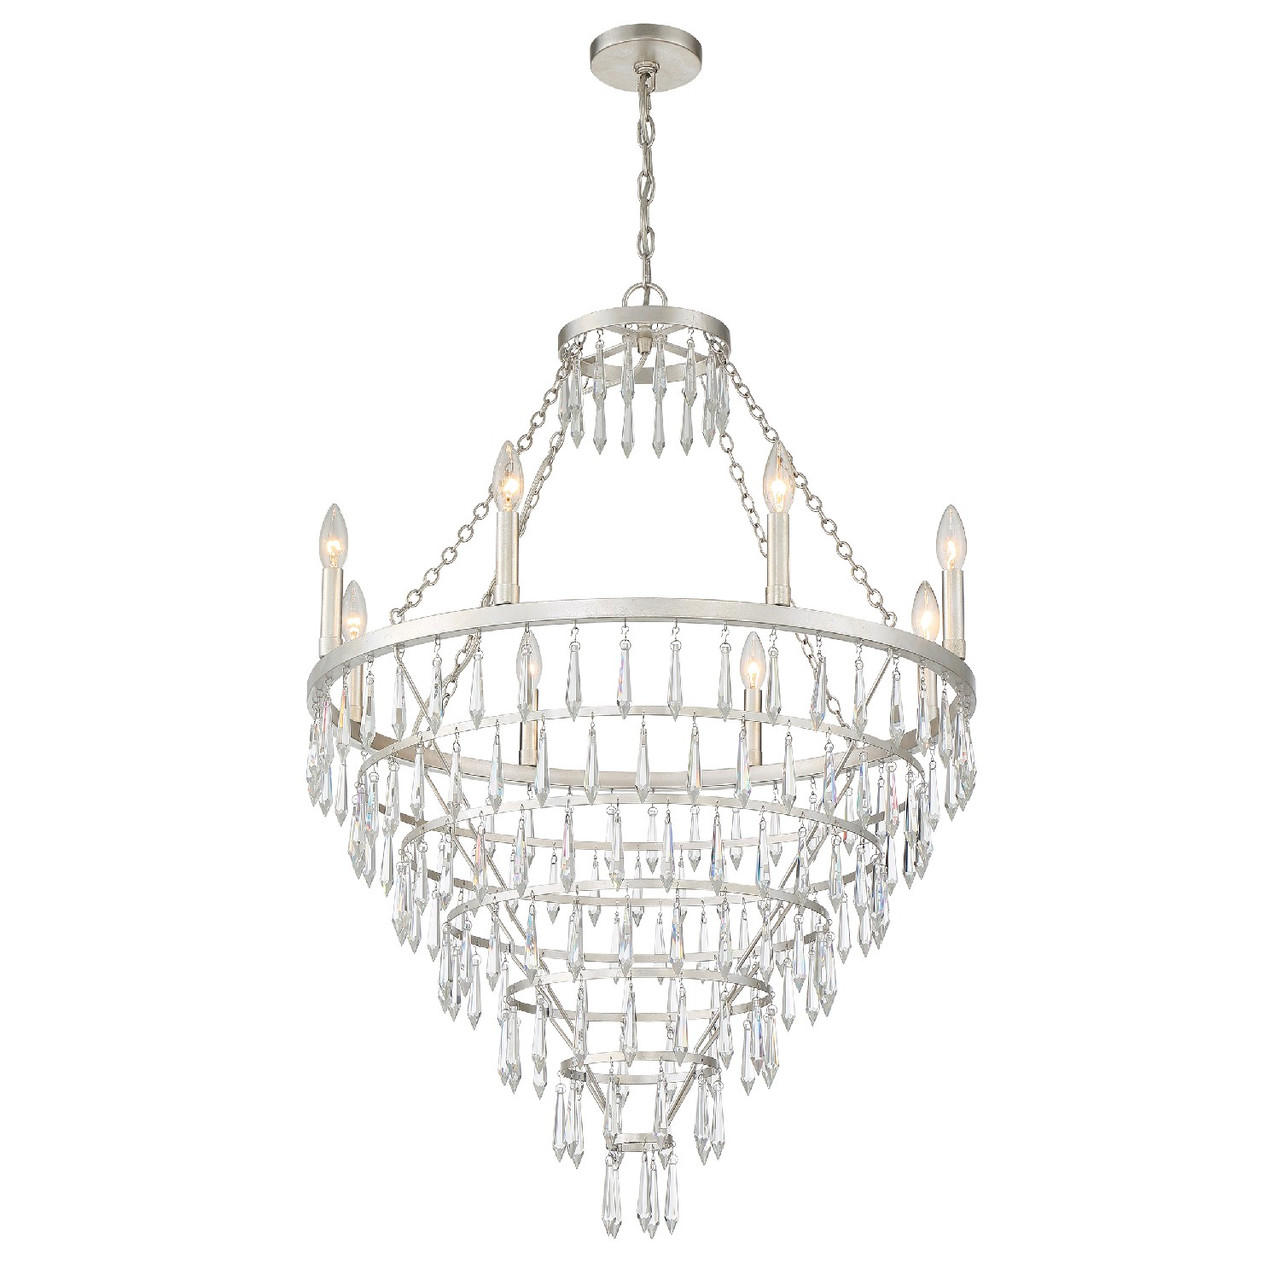 CRYSTORAMA LUC-A9068-SA Lucille 8 Light Antique Silver Chandelier